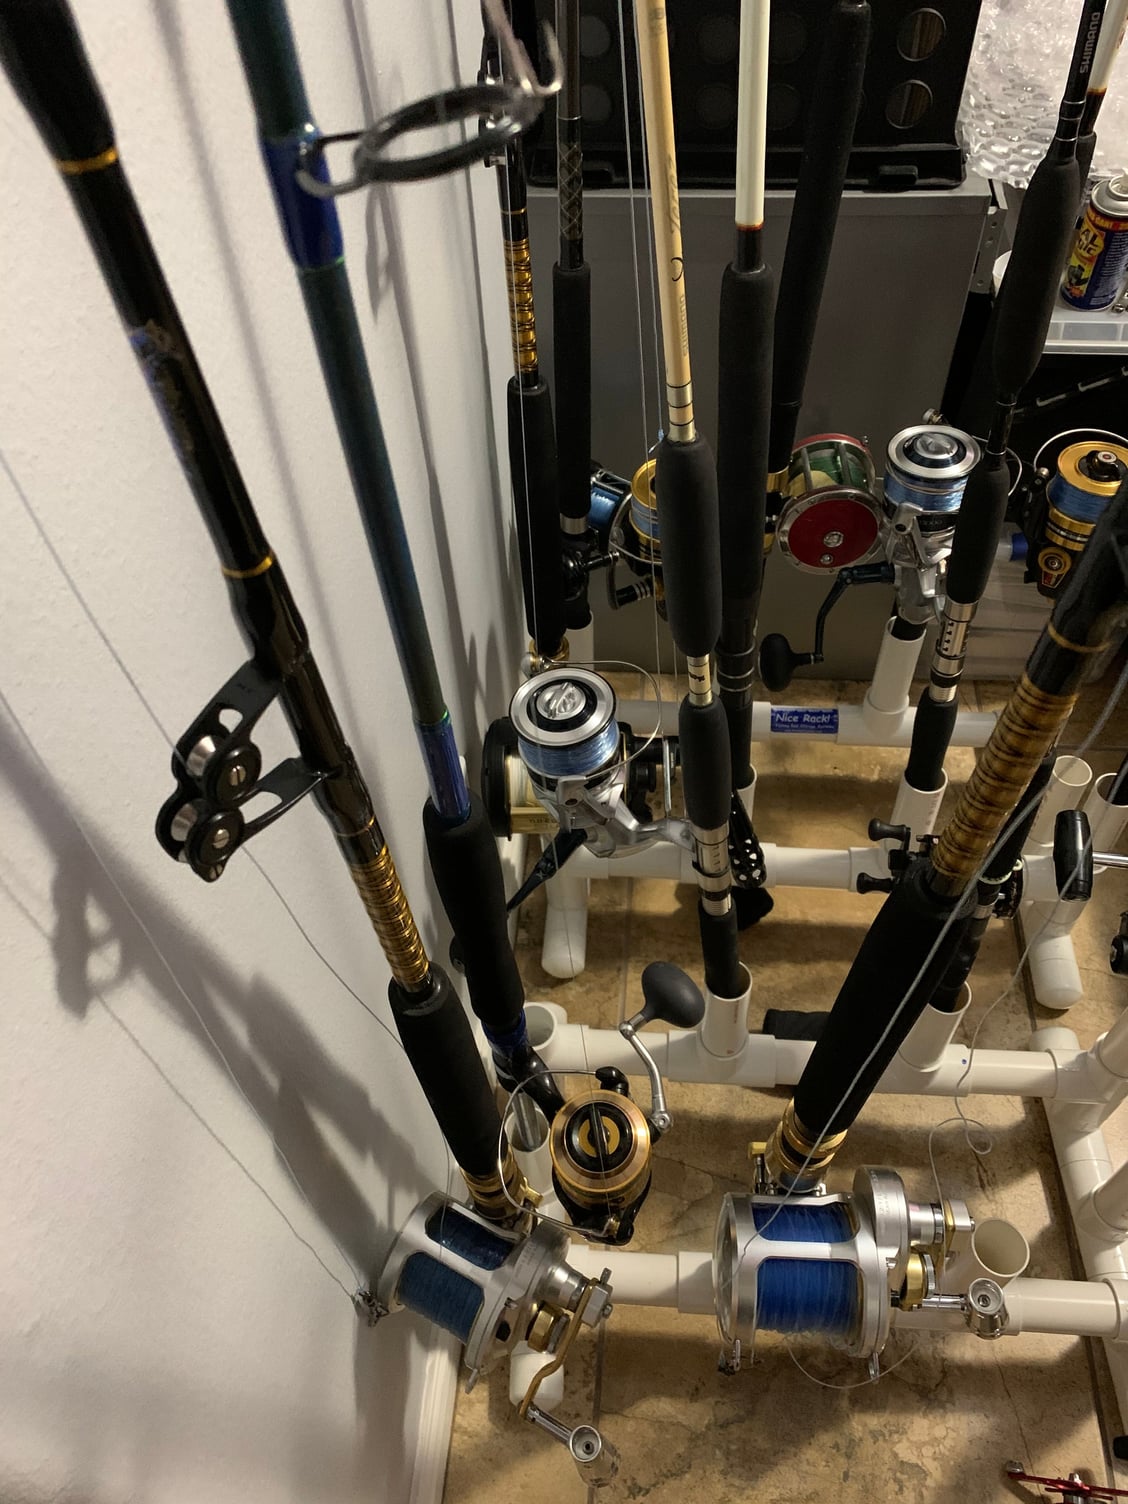 Shimano, Penn, Abu Garcia rod and reels. - The Hull Truth - Boating and  Fishing Forum